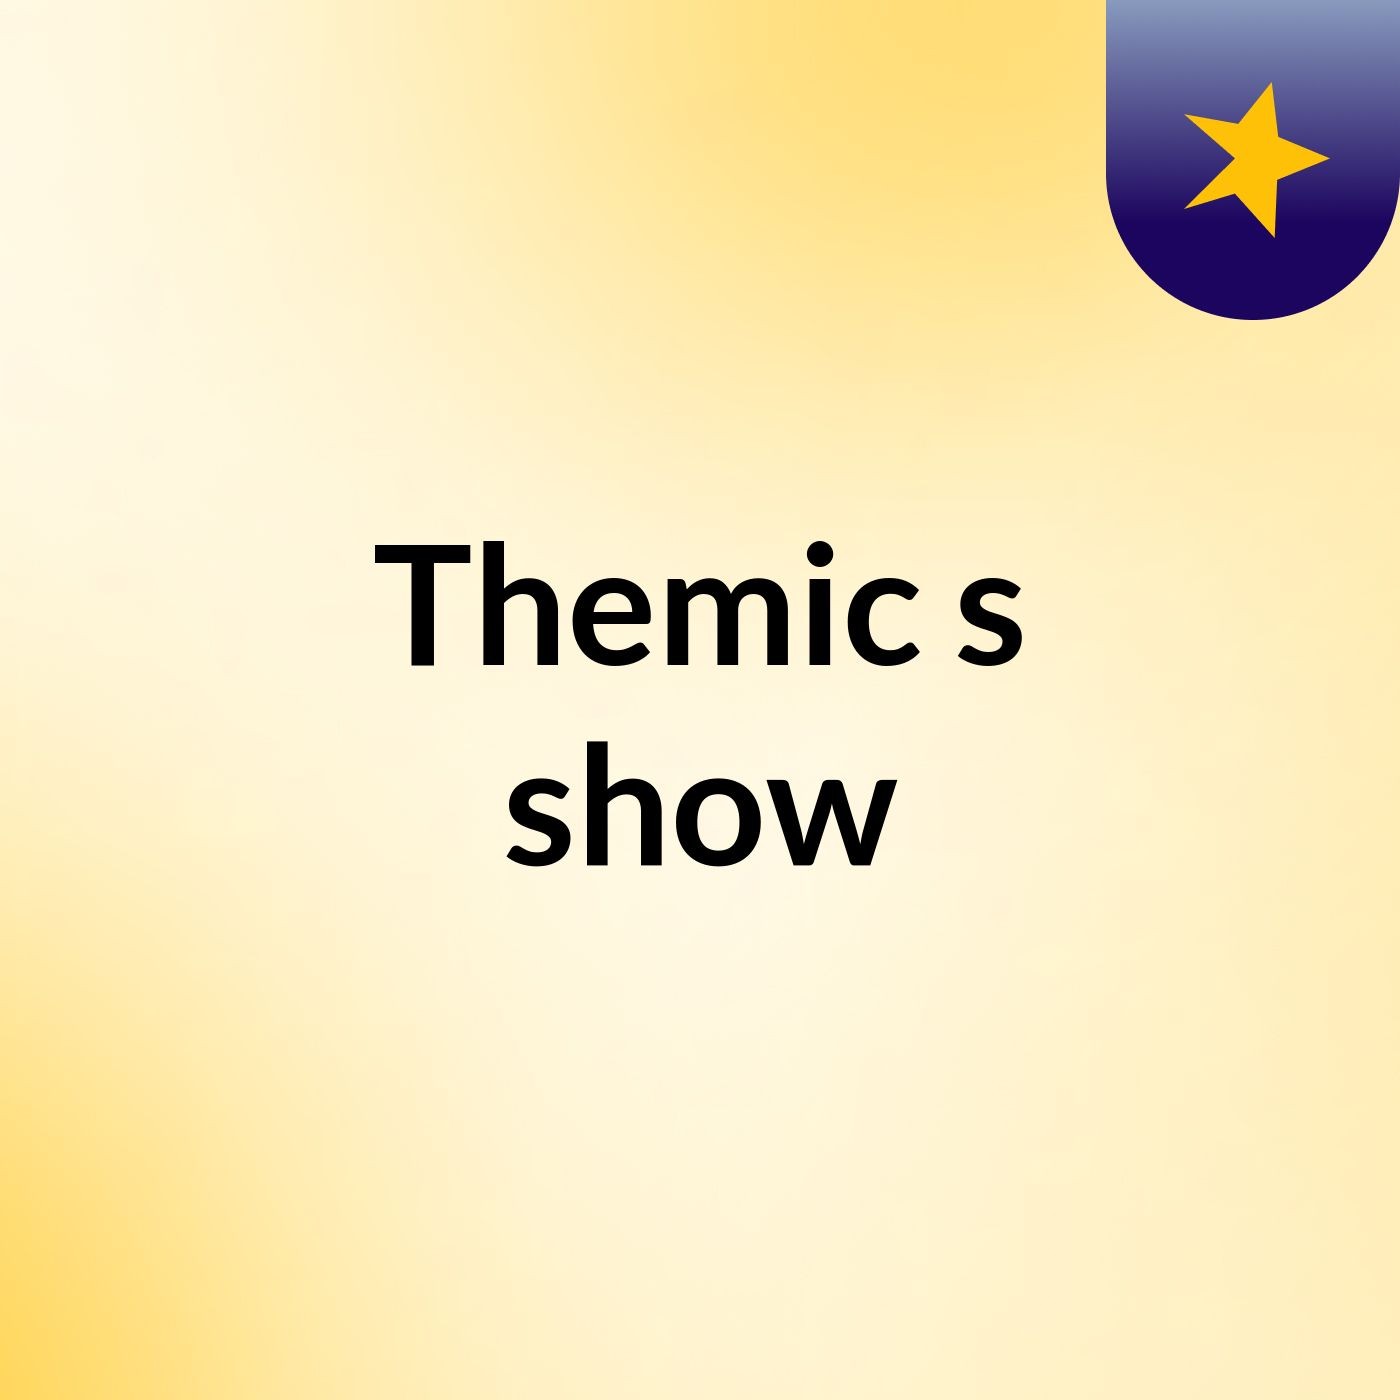 Themic's show